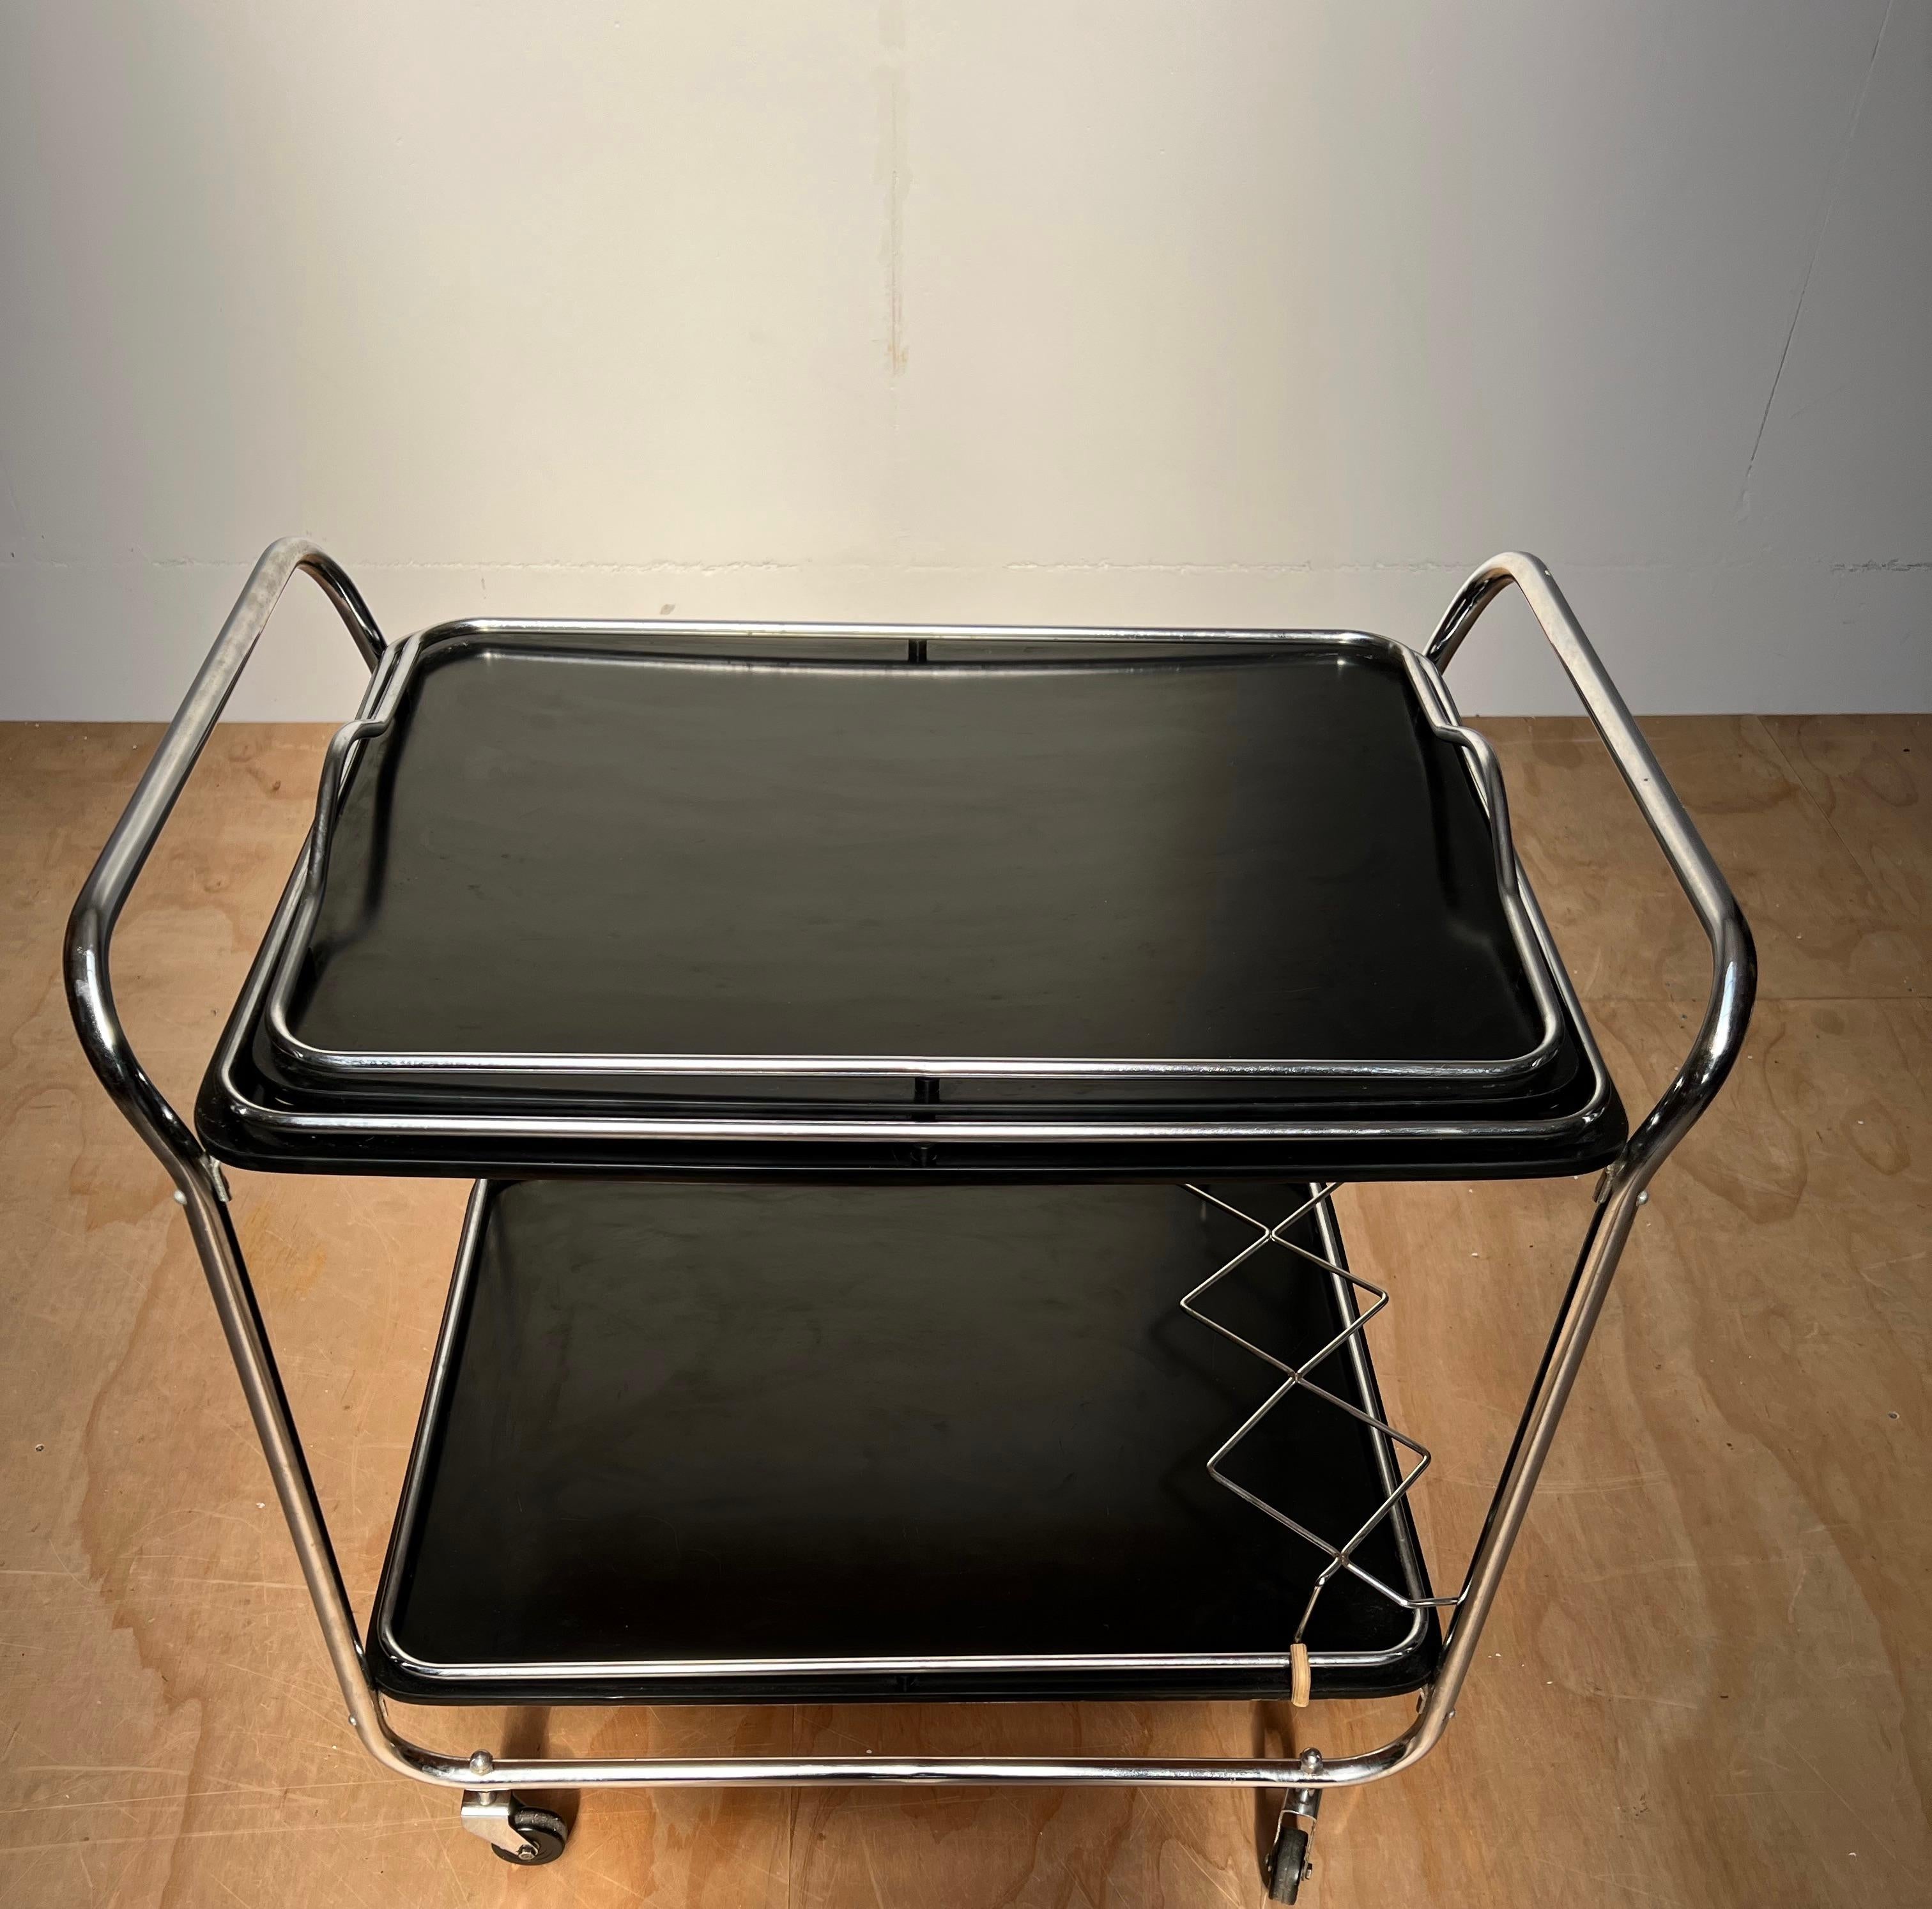 European Midcentury Modern Drinks Trolley / Bar Cart w. Tray, Blackened Wood and Chrome For Sale